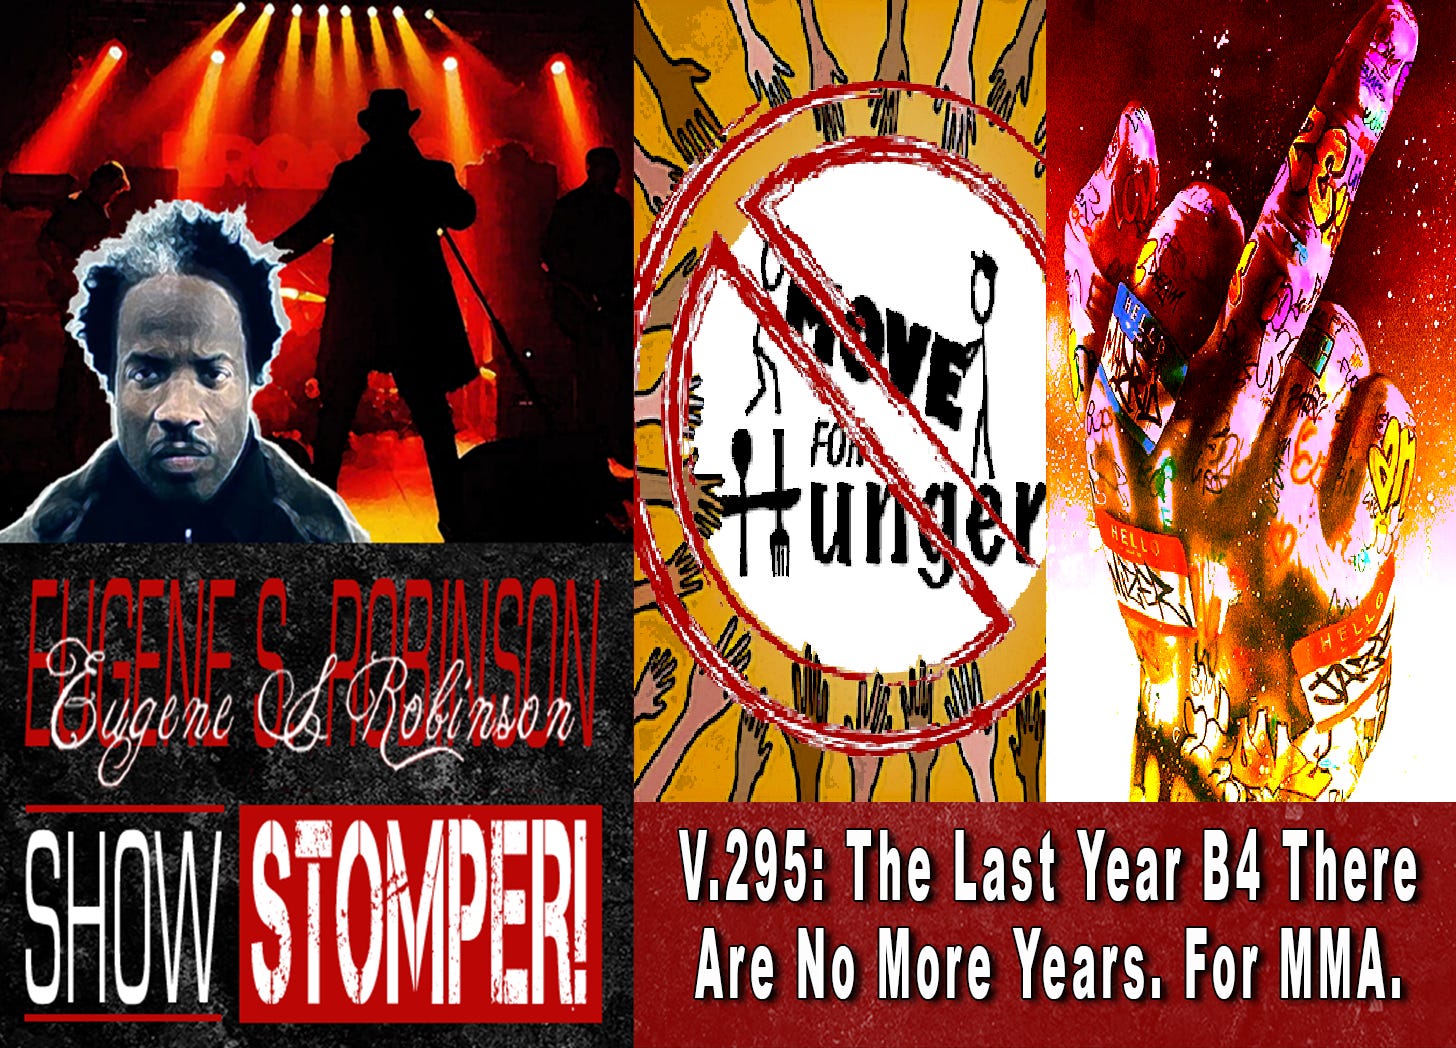 V.295: The Last Year B4 There Are No More Years. For MMA. On the Eugene S. Robinson Show Stomper!